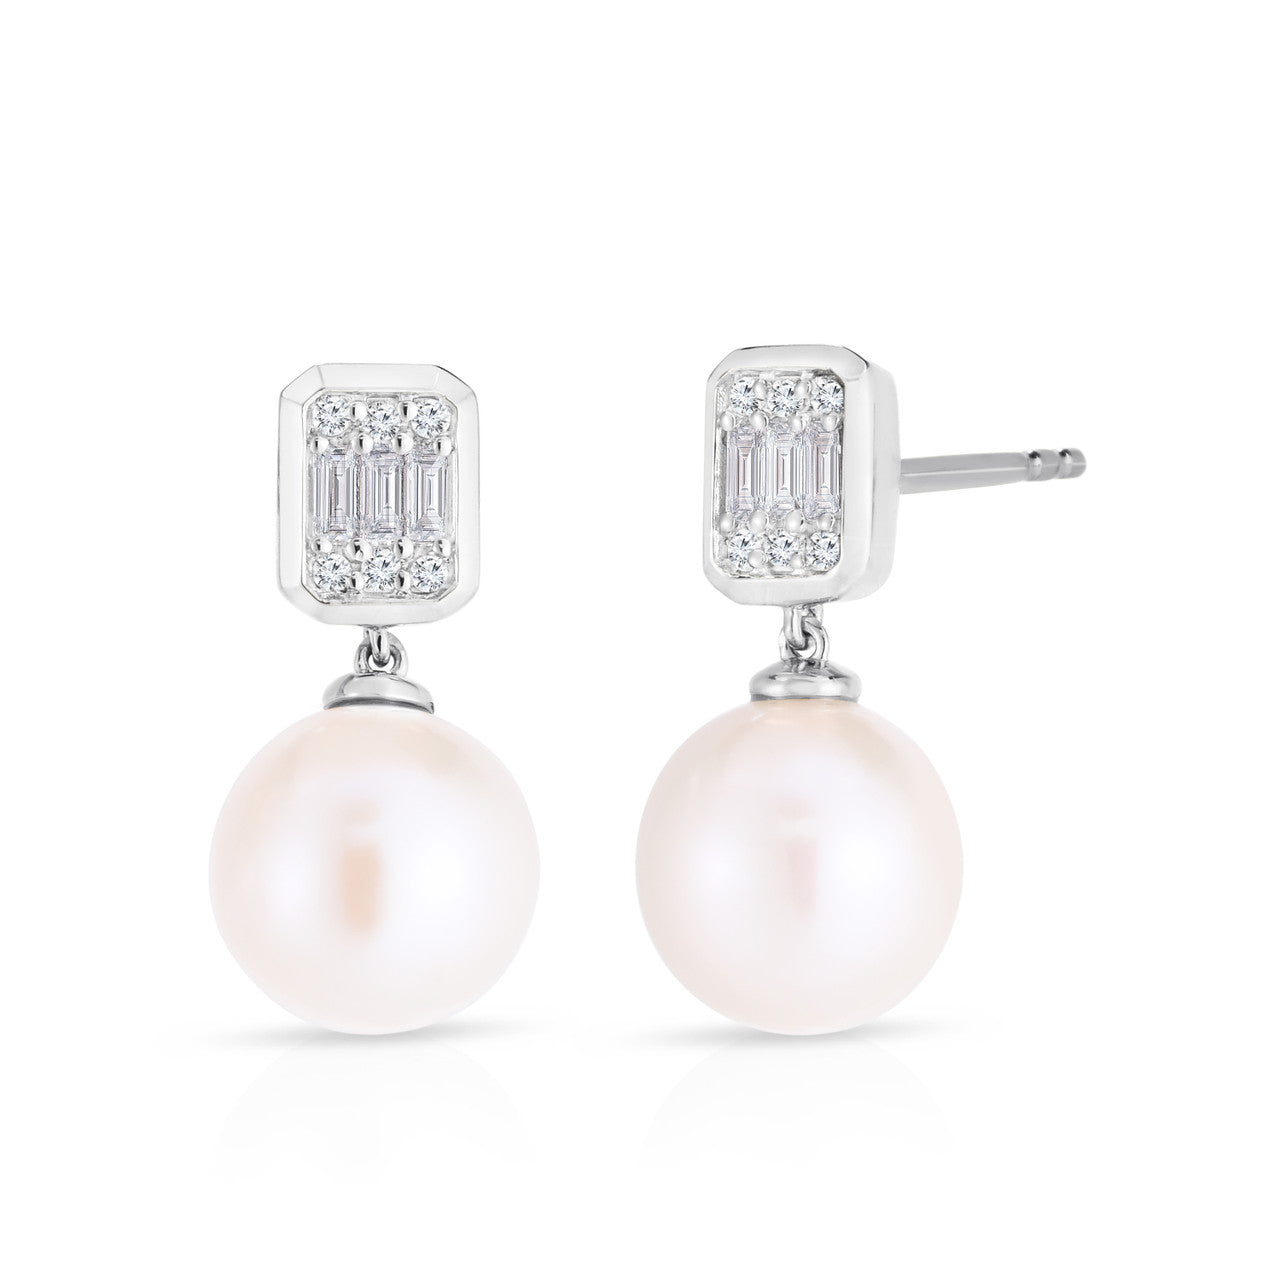 Emerald Illusion Diamond and Pearl Drop Earrings in White Gold